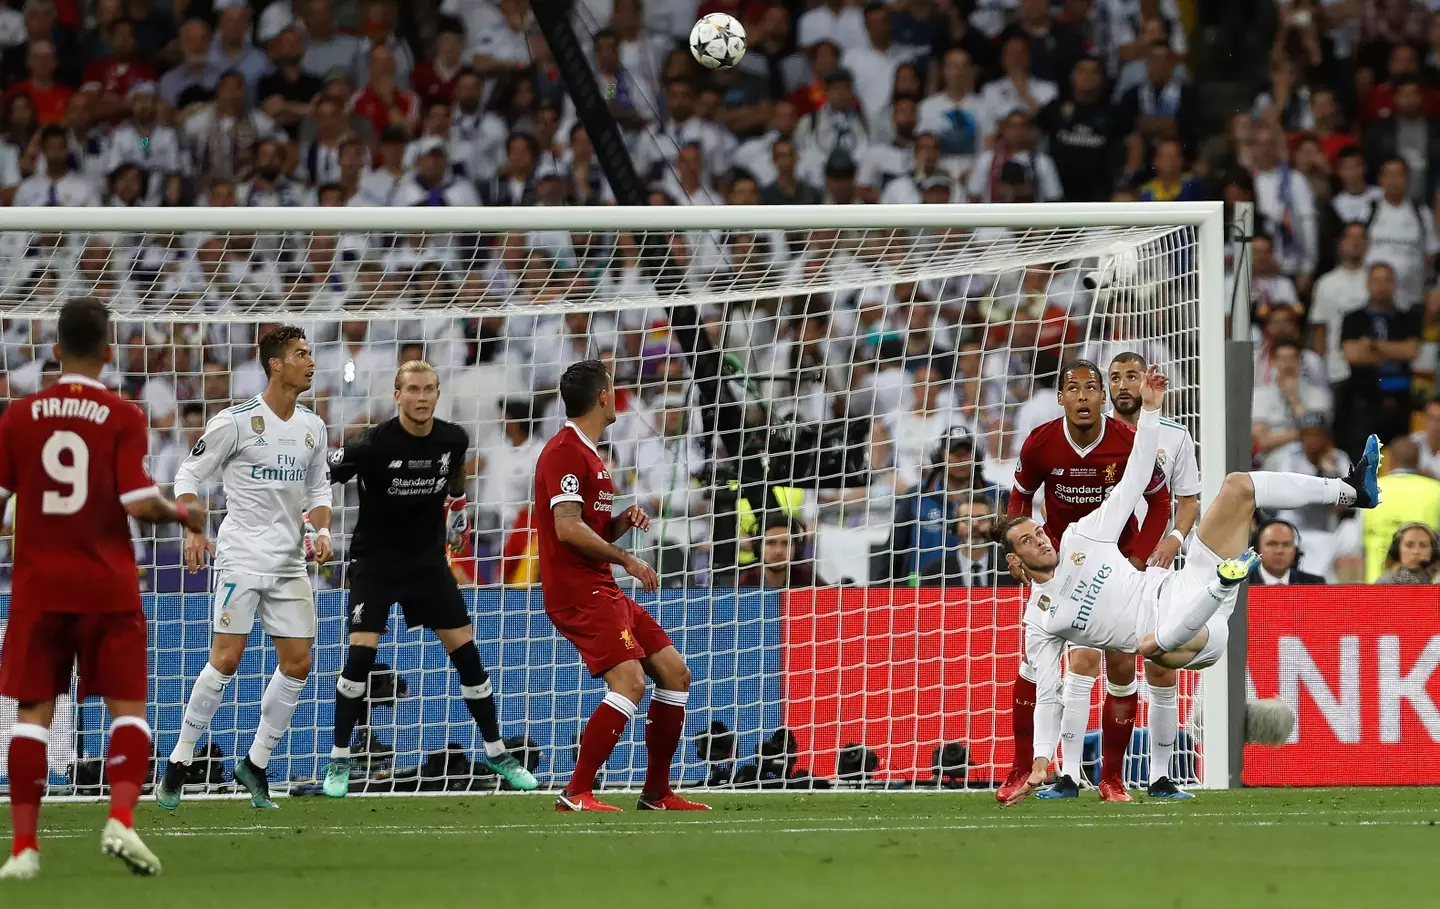 Gareth Bale's acrobatic goal for Real Madrid in 2018 vs Liverpool in the Champions League final. (